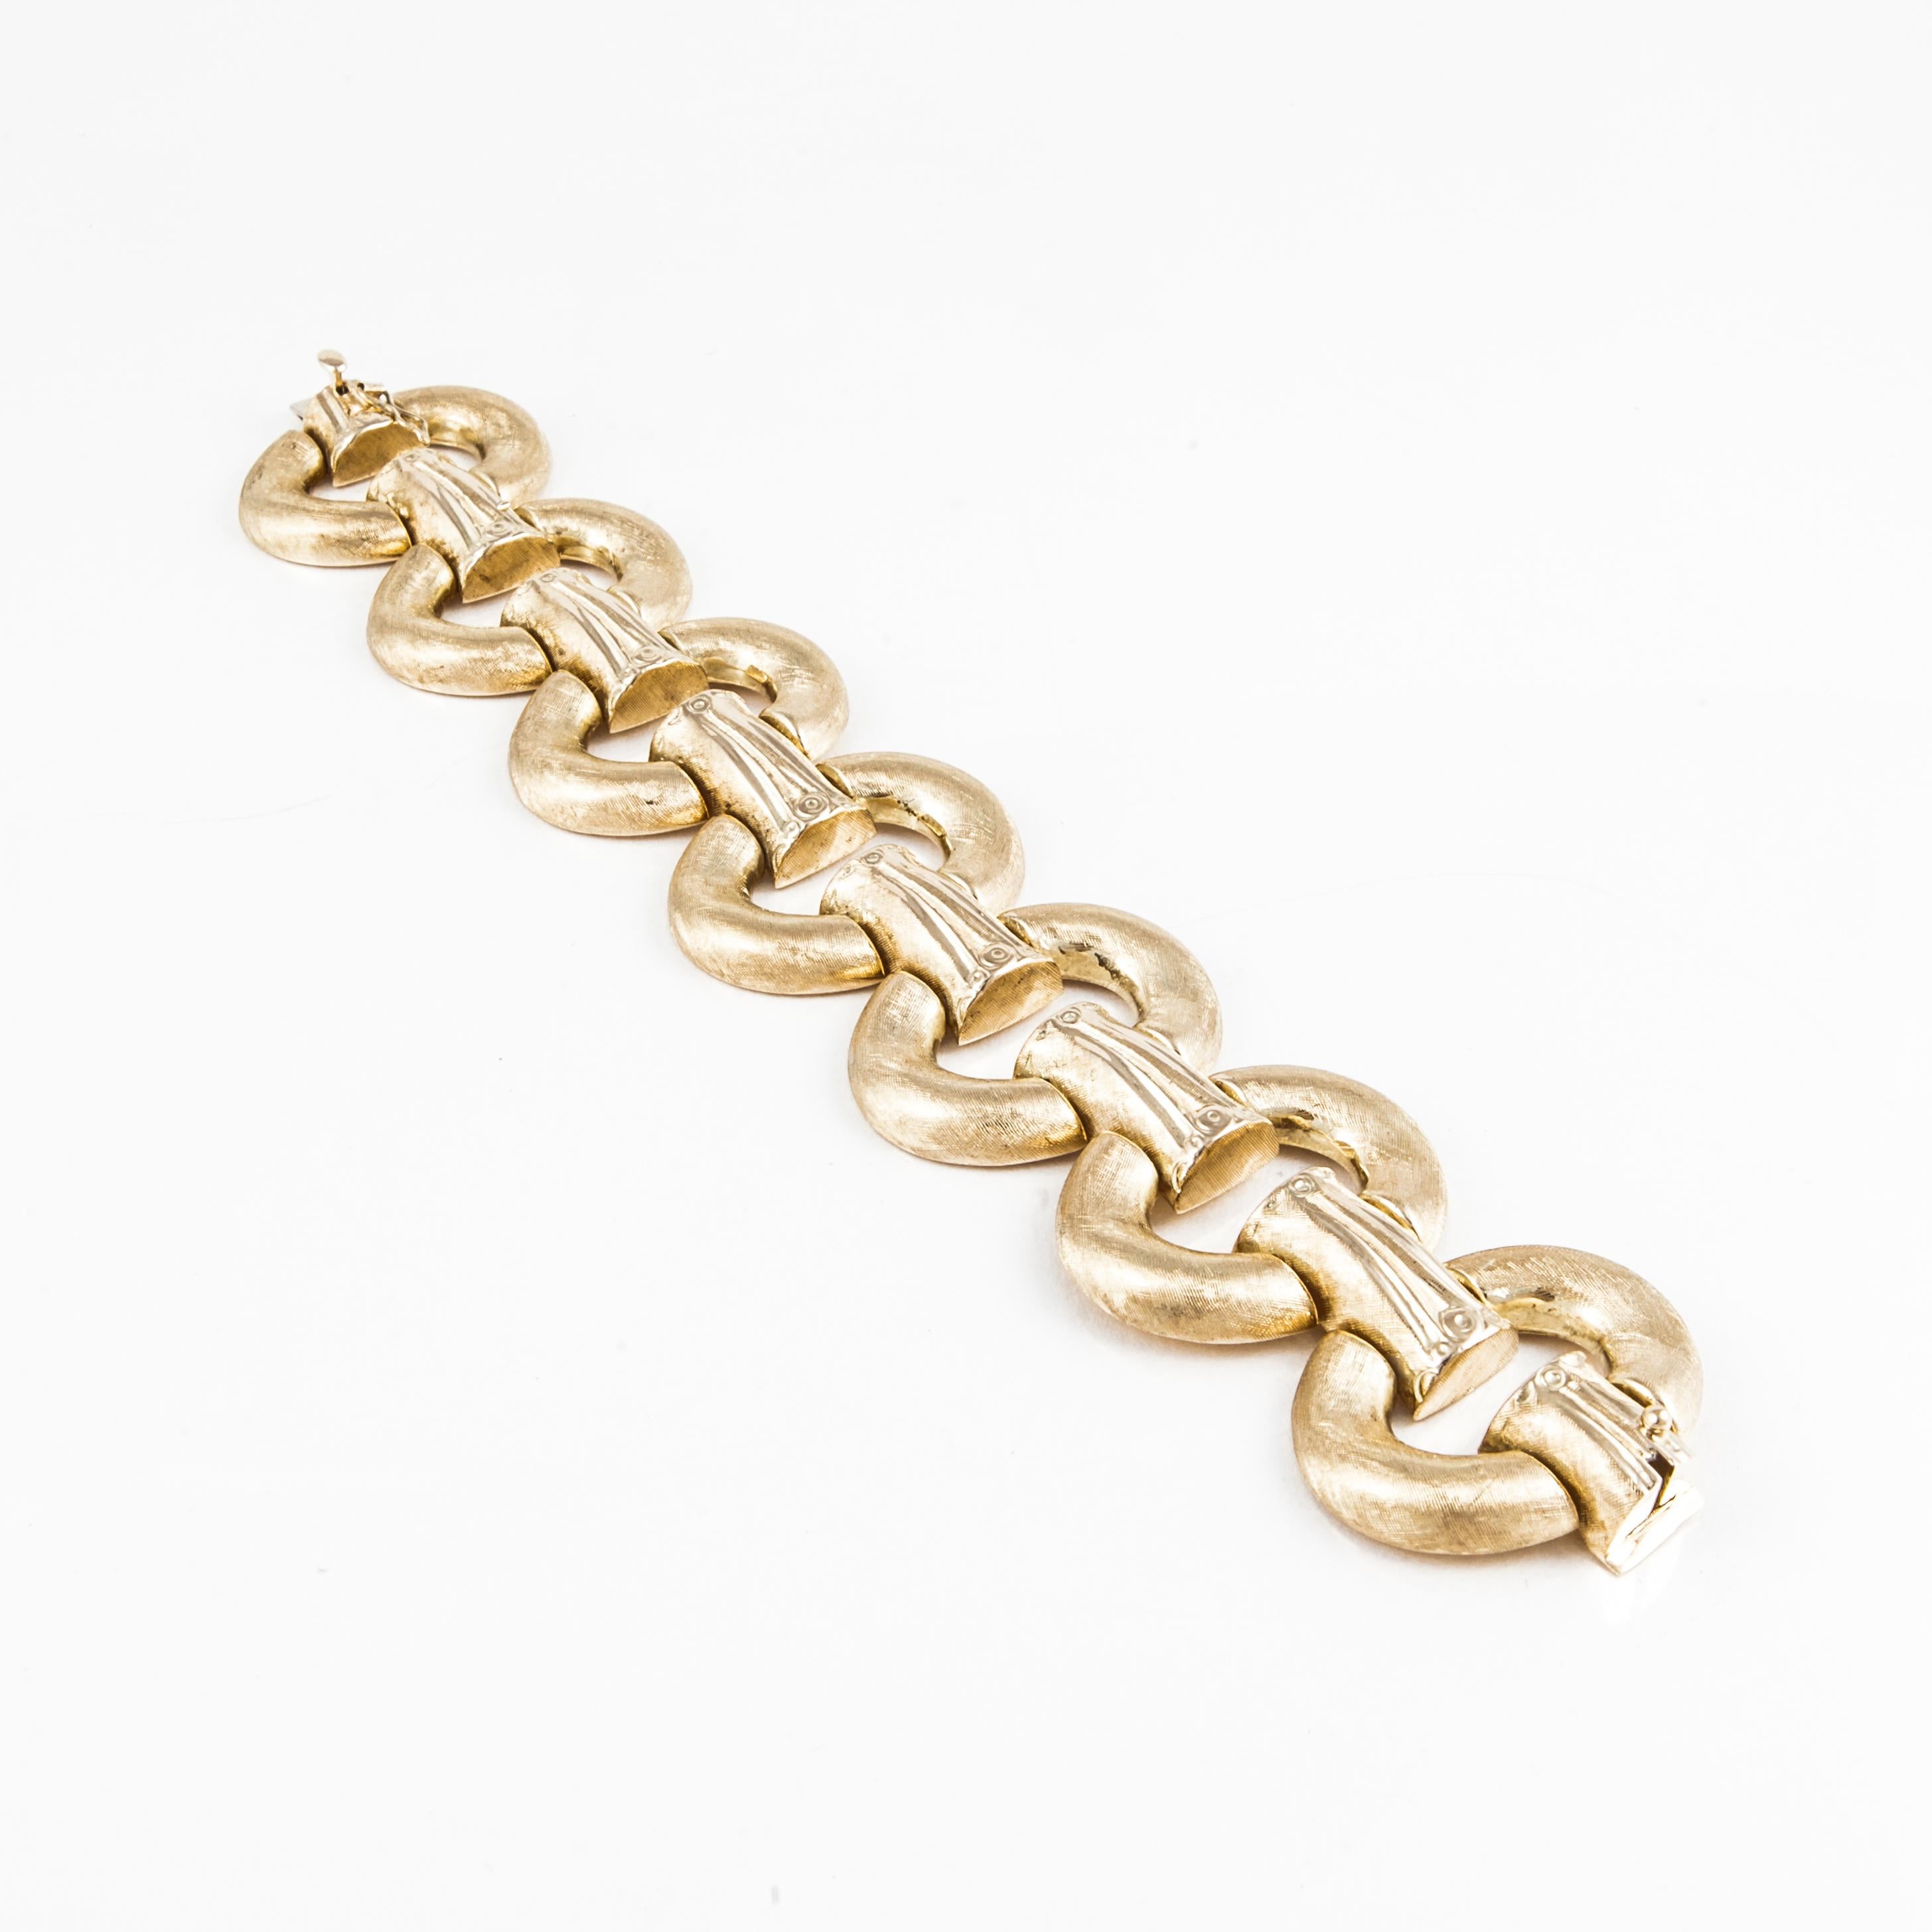 Large oval link bracelet composed of 14K brushed yellow gold.  It is marked 